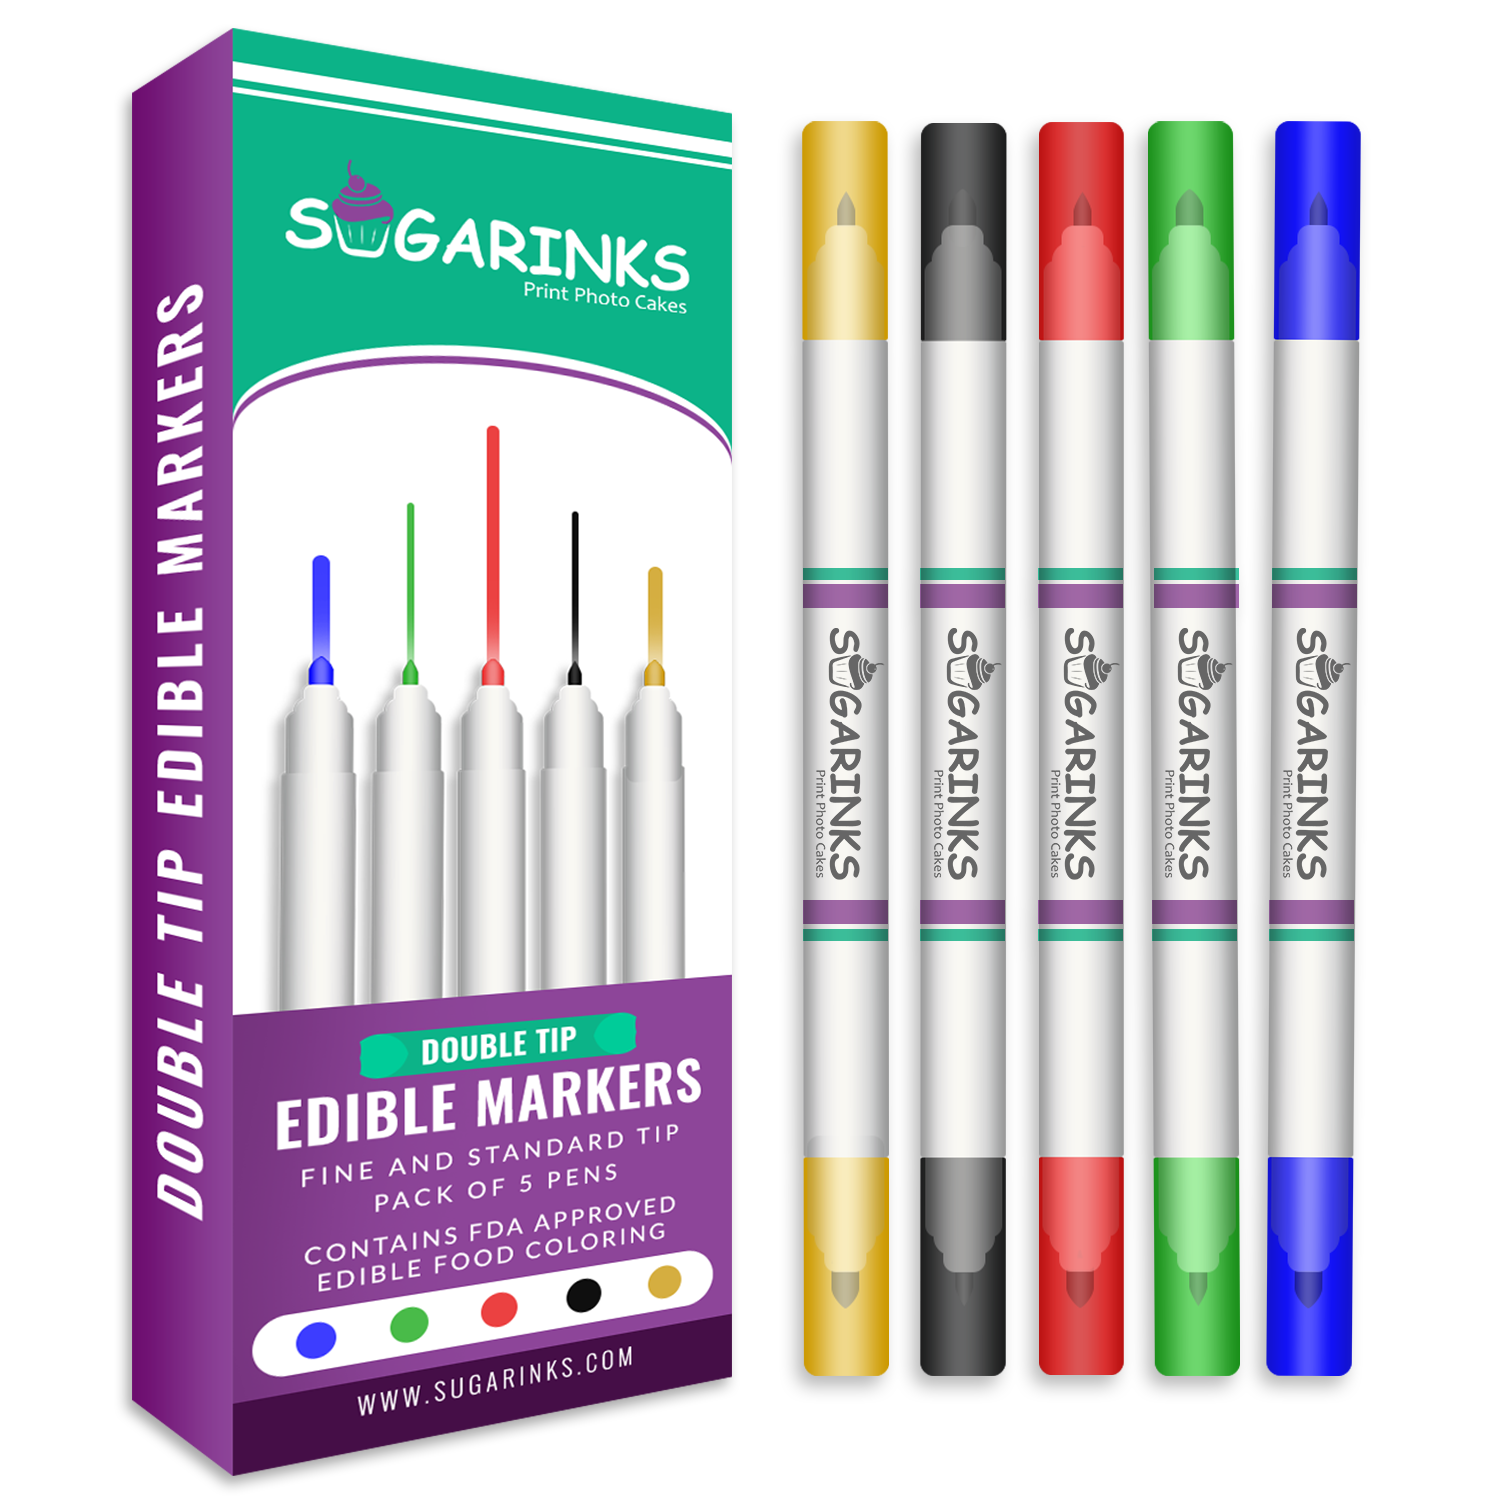 Sugarinks Edible Ink Marker Double Tip (Standard and Fine) Pack of 5 for Cake, Cookie, and Cupcake Art Edible Pen Set - Black, Green, Yellow, Blue and Red